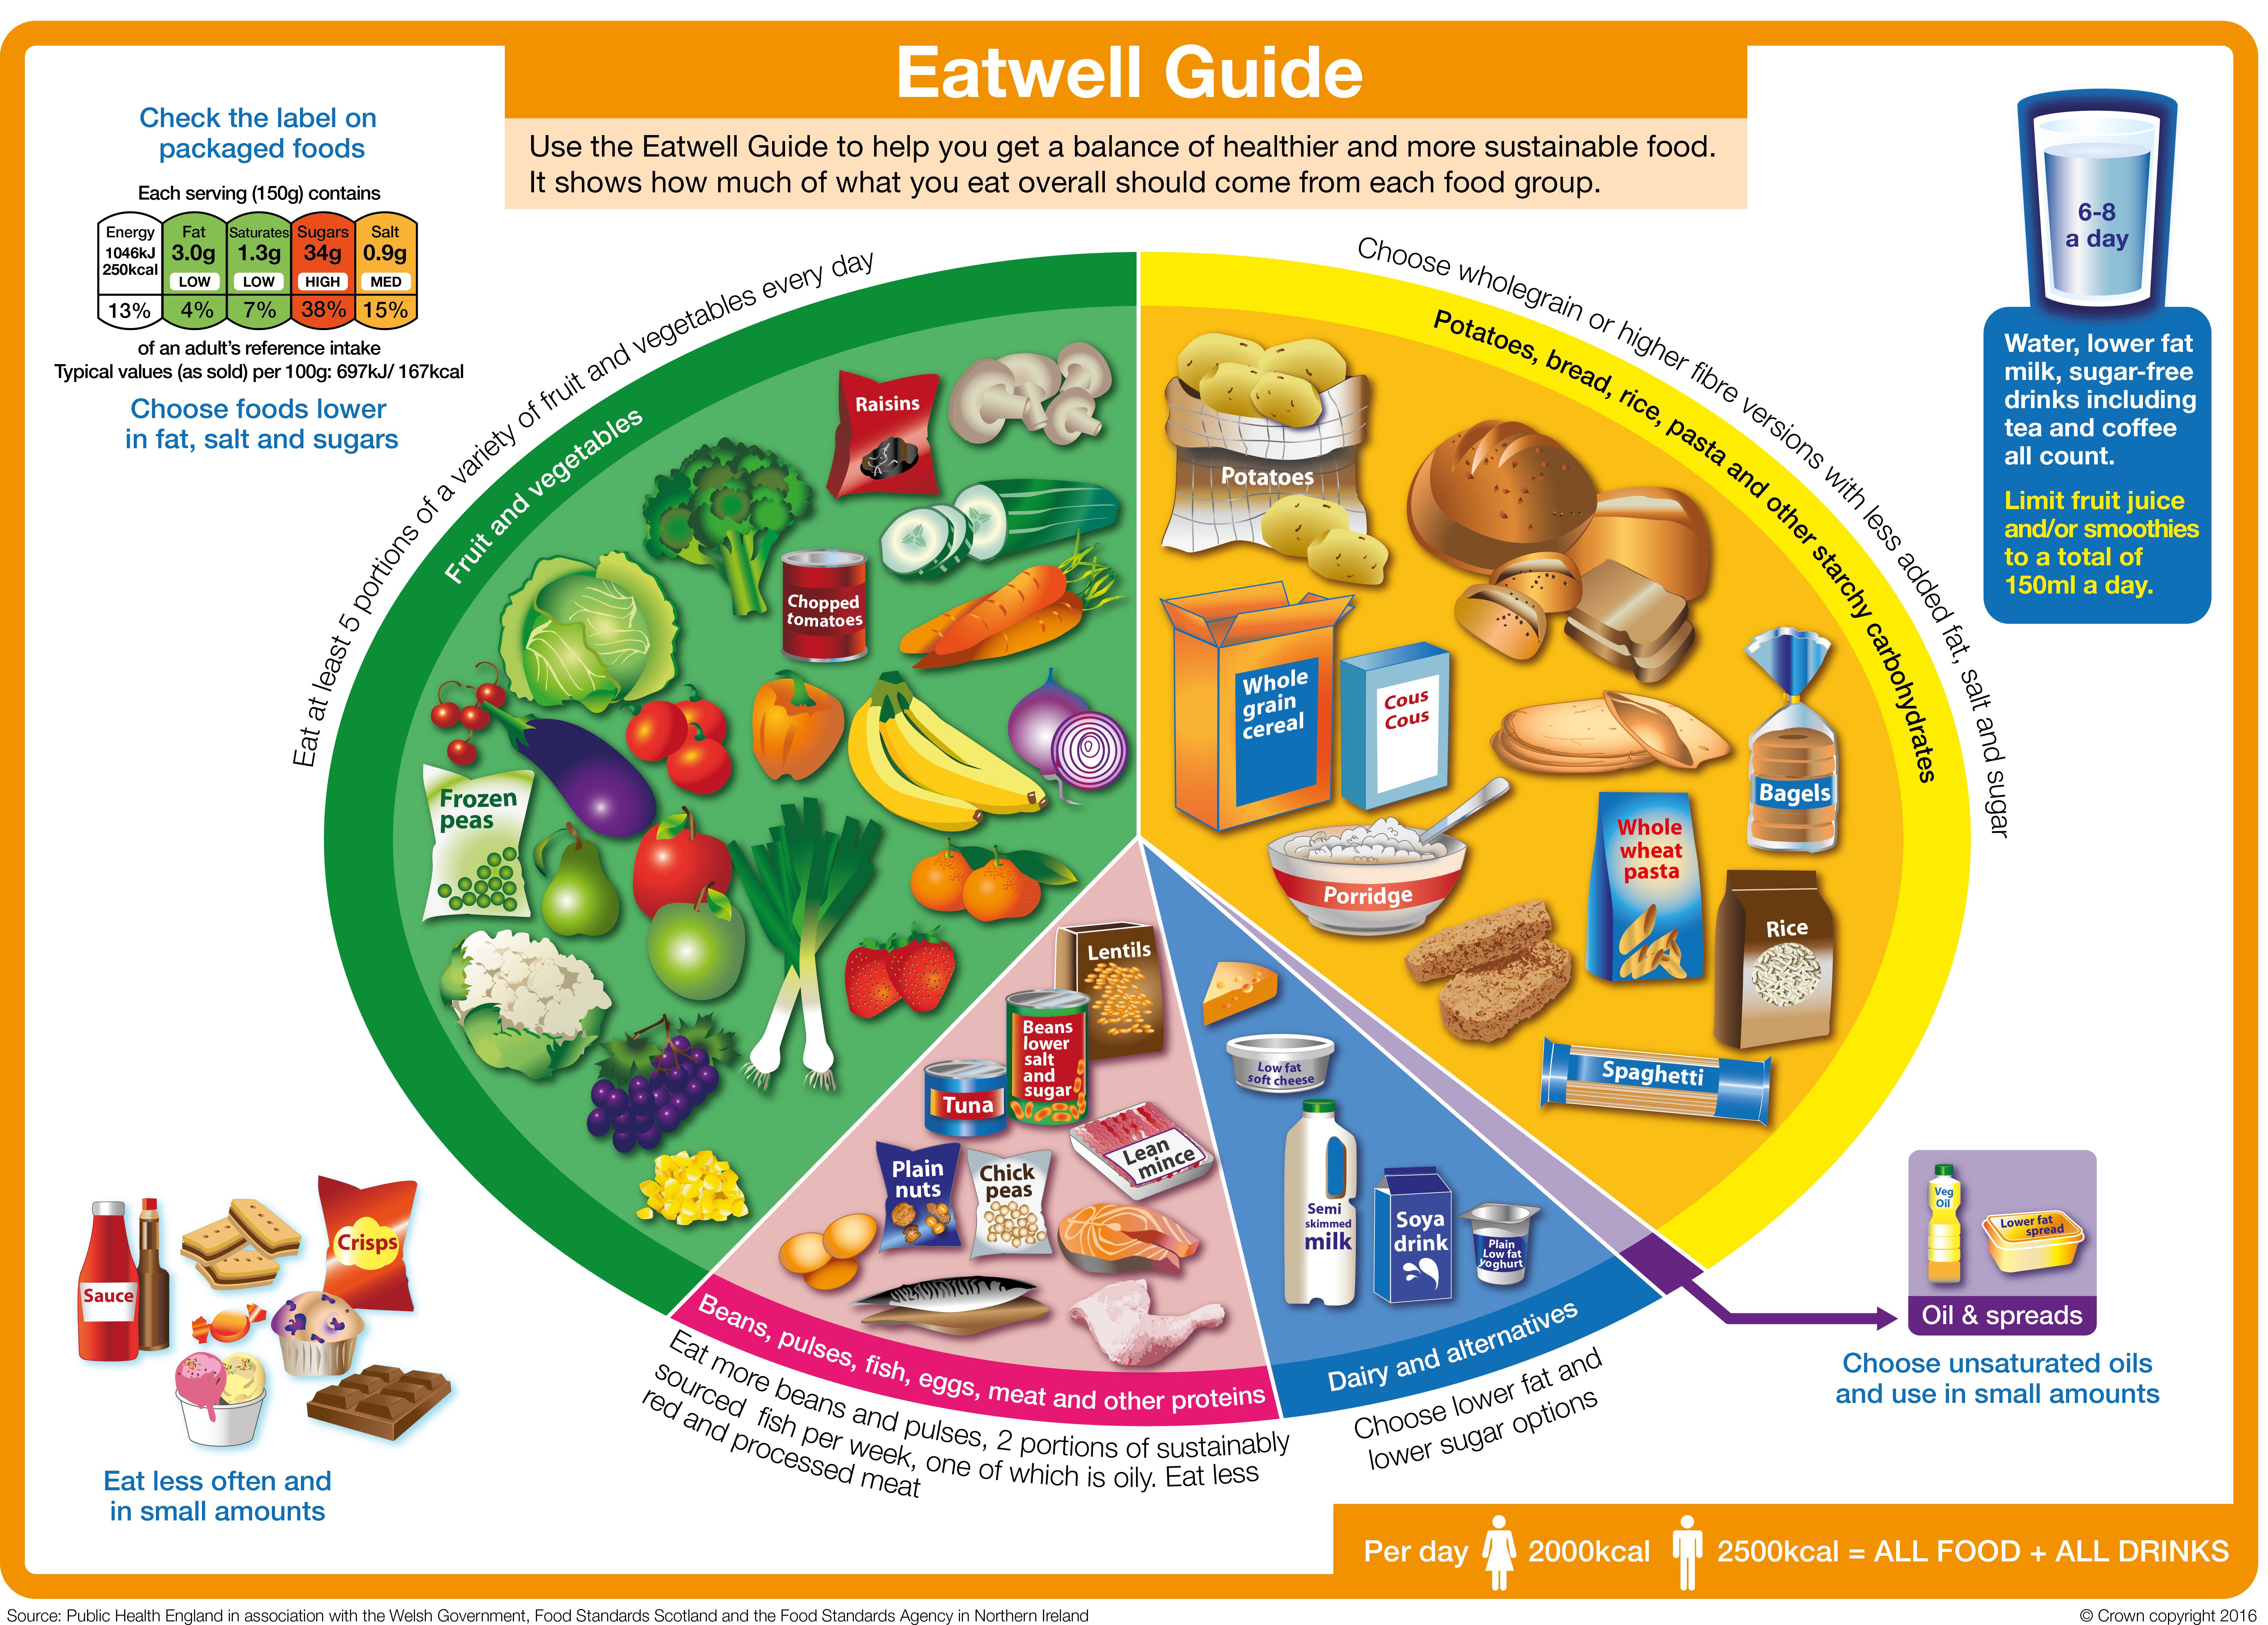 The UK government Eatwell Guide